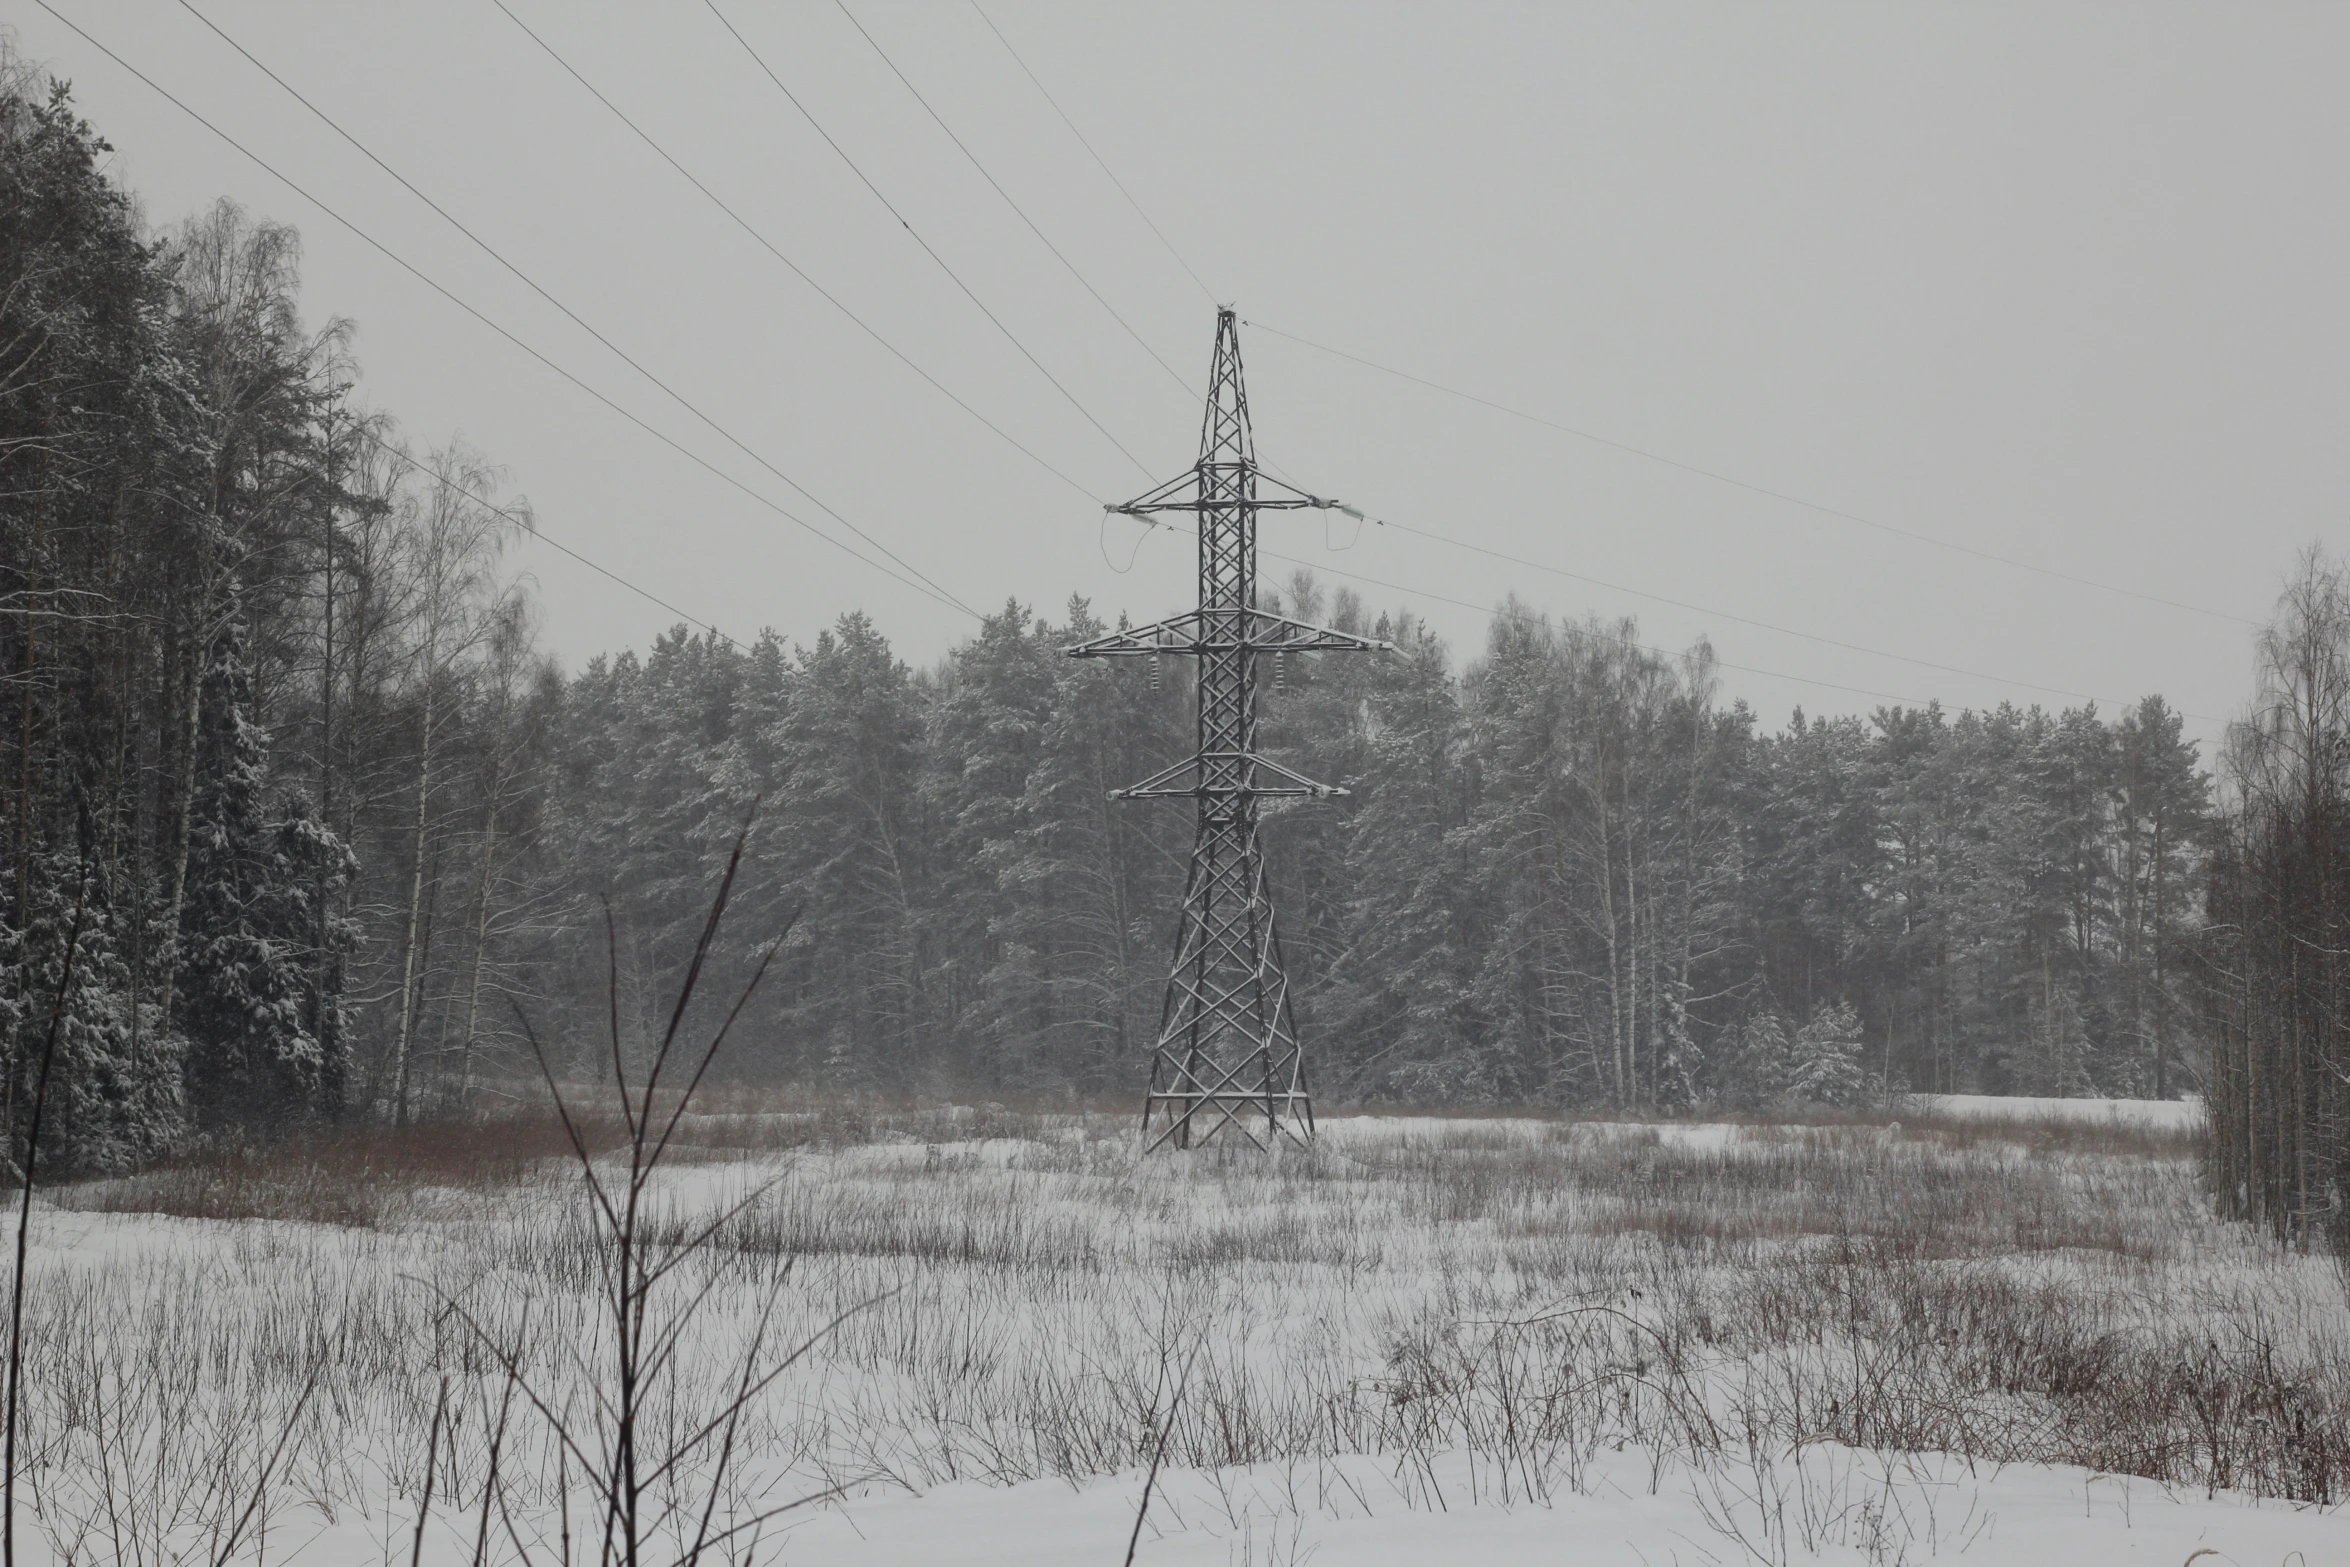 a power tower in a snowy forest setting